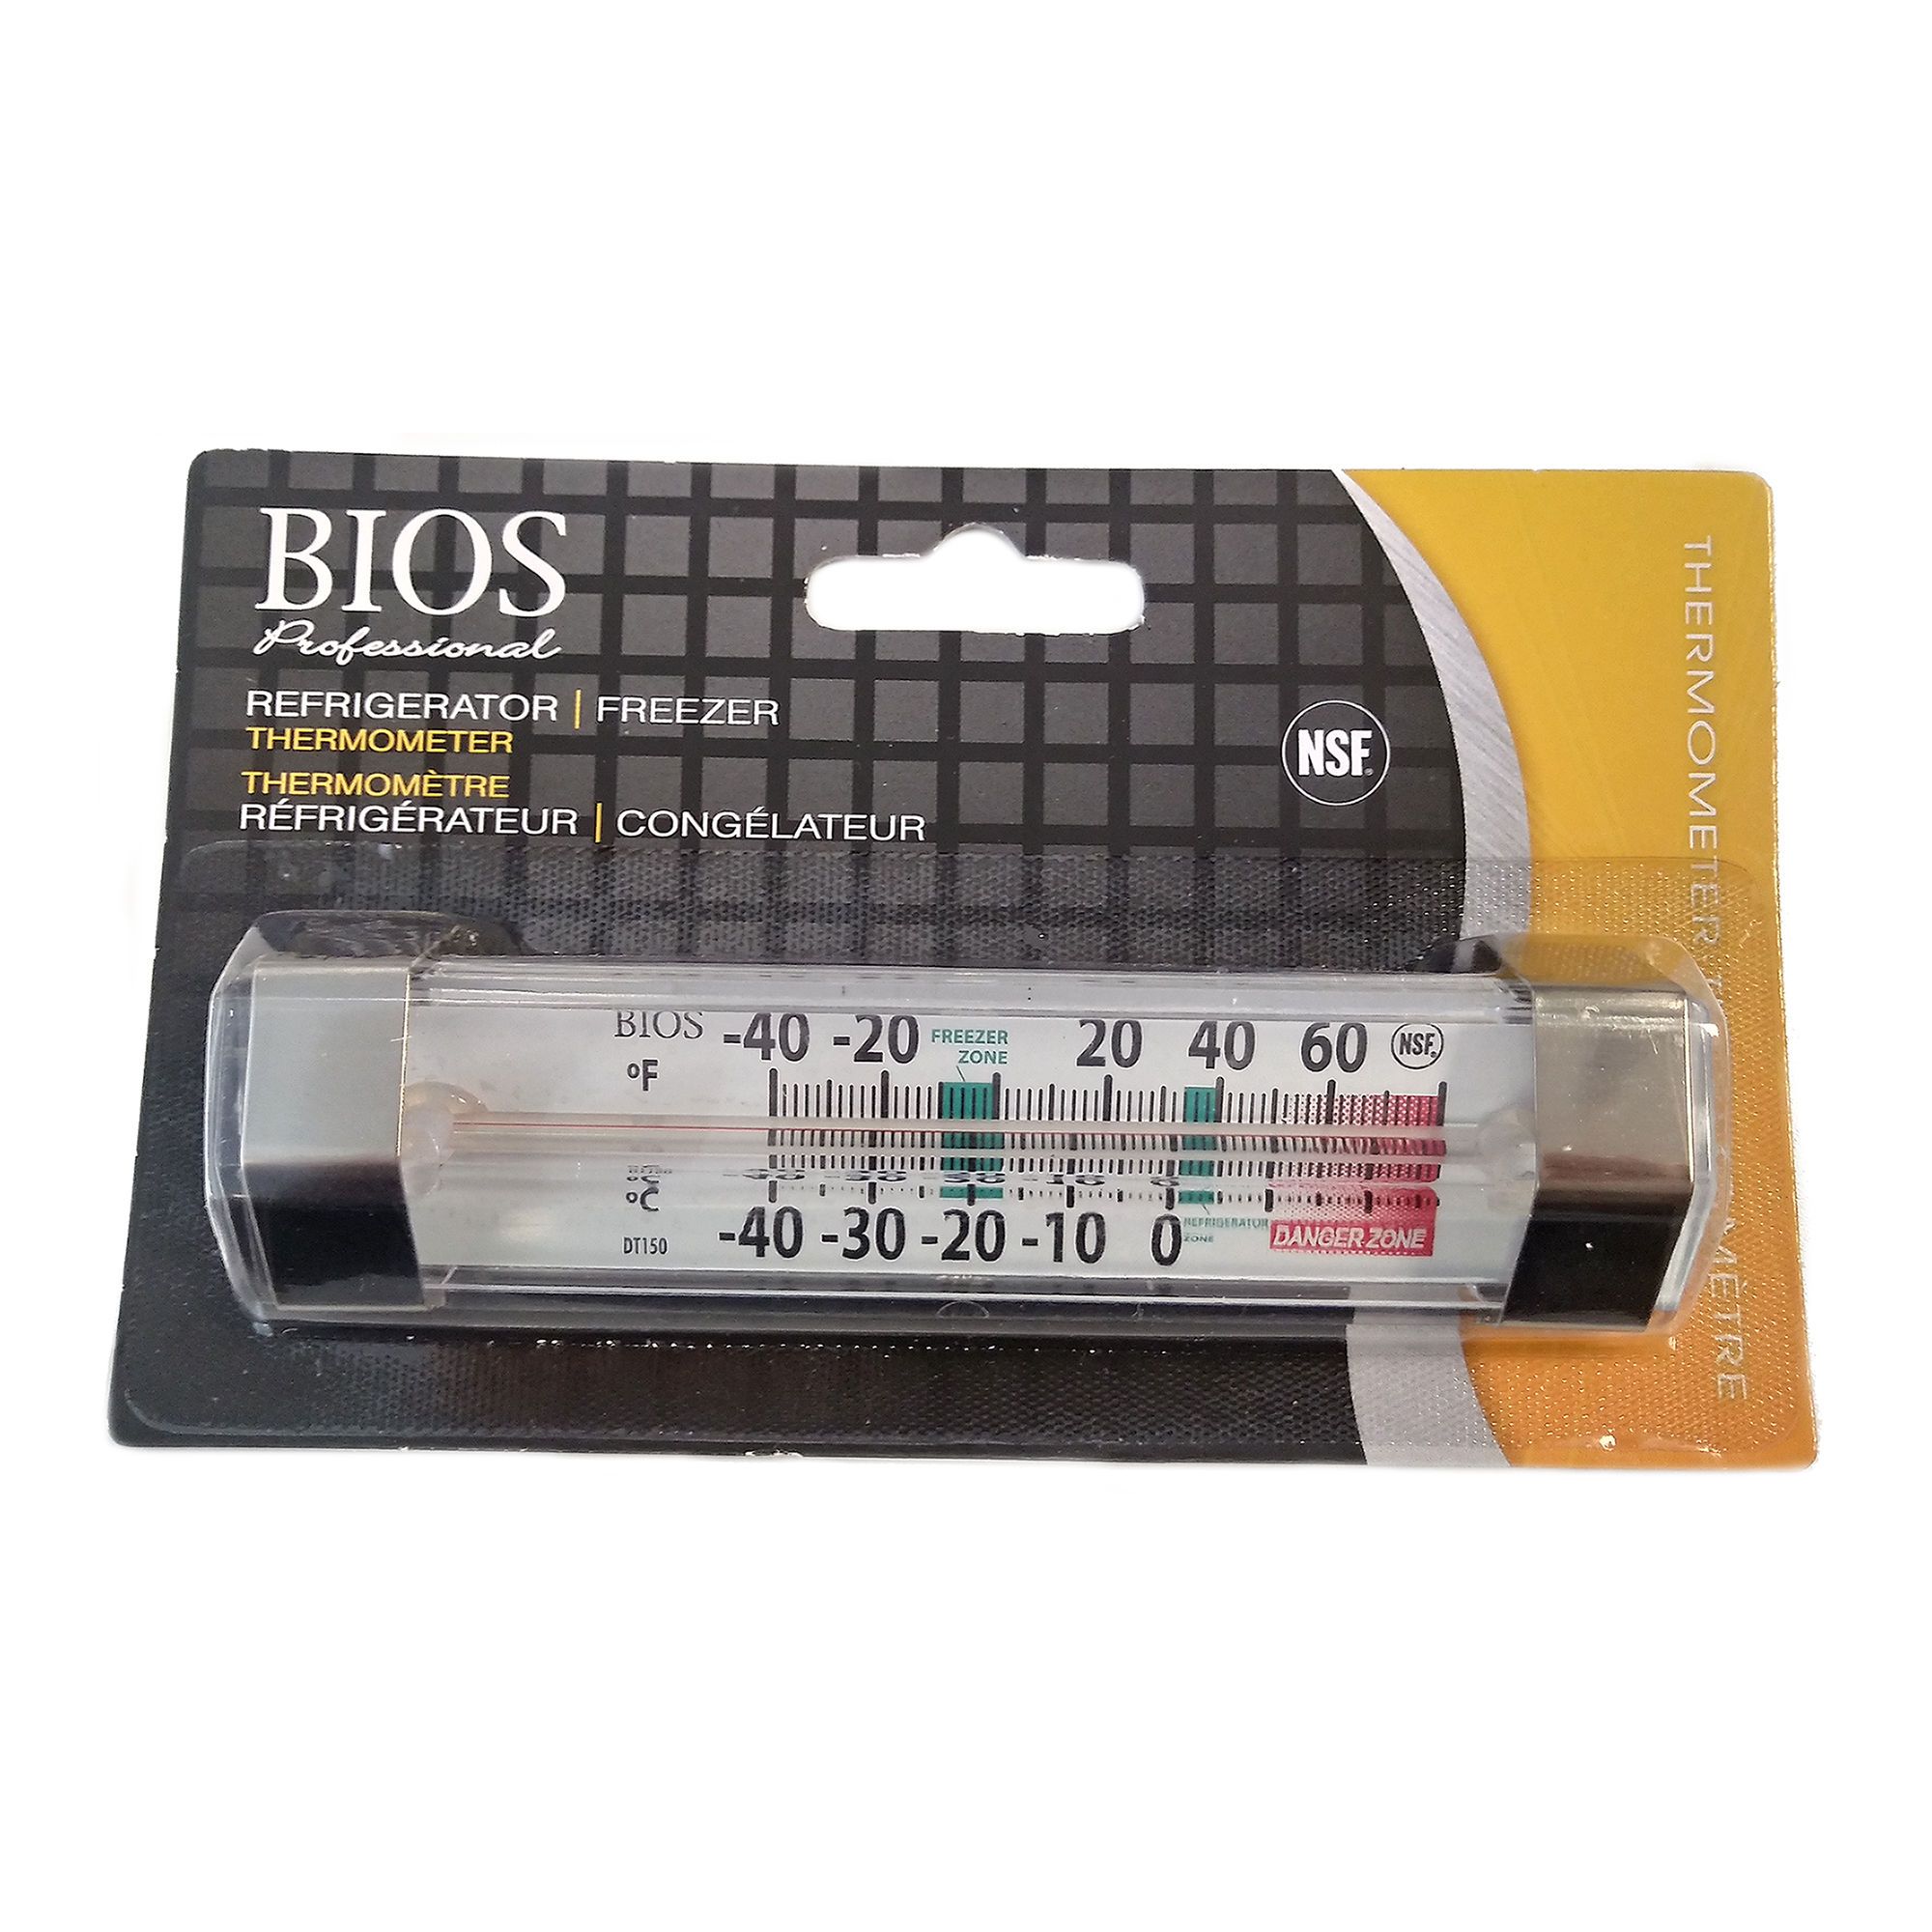 Thermor Bios Indoor Hygrometer with Thermometer